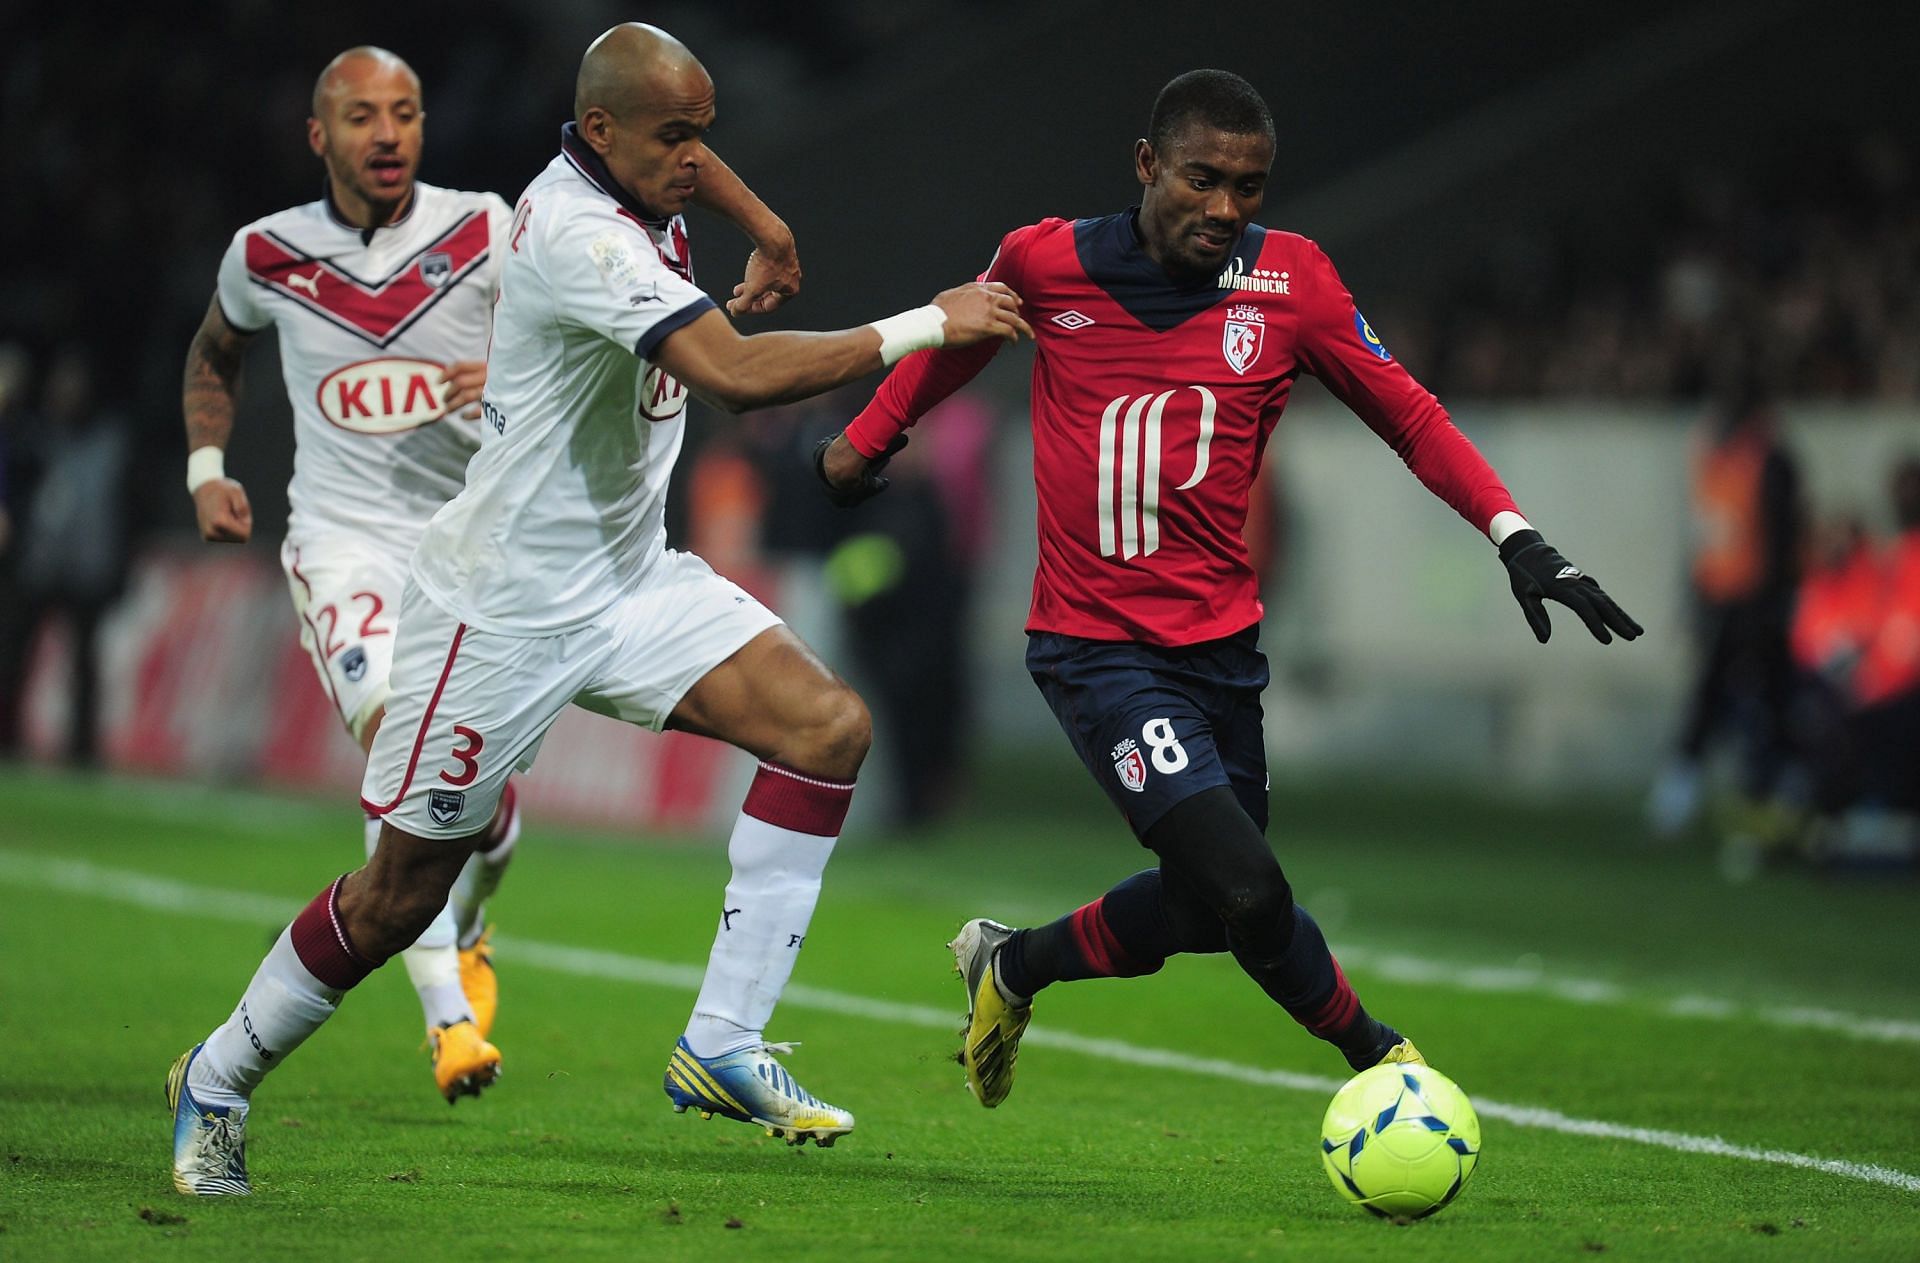 Lille are on a four-game winning run against Bordeaux